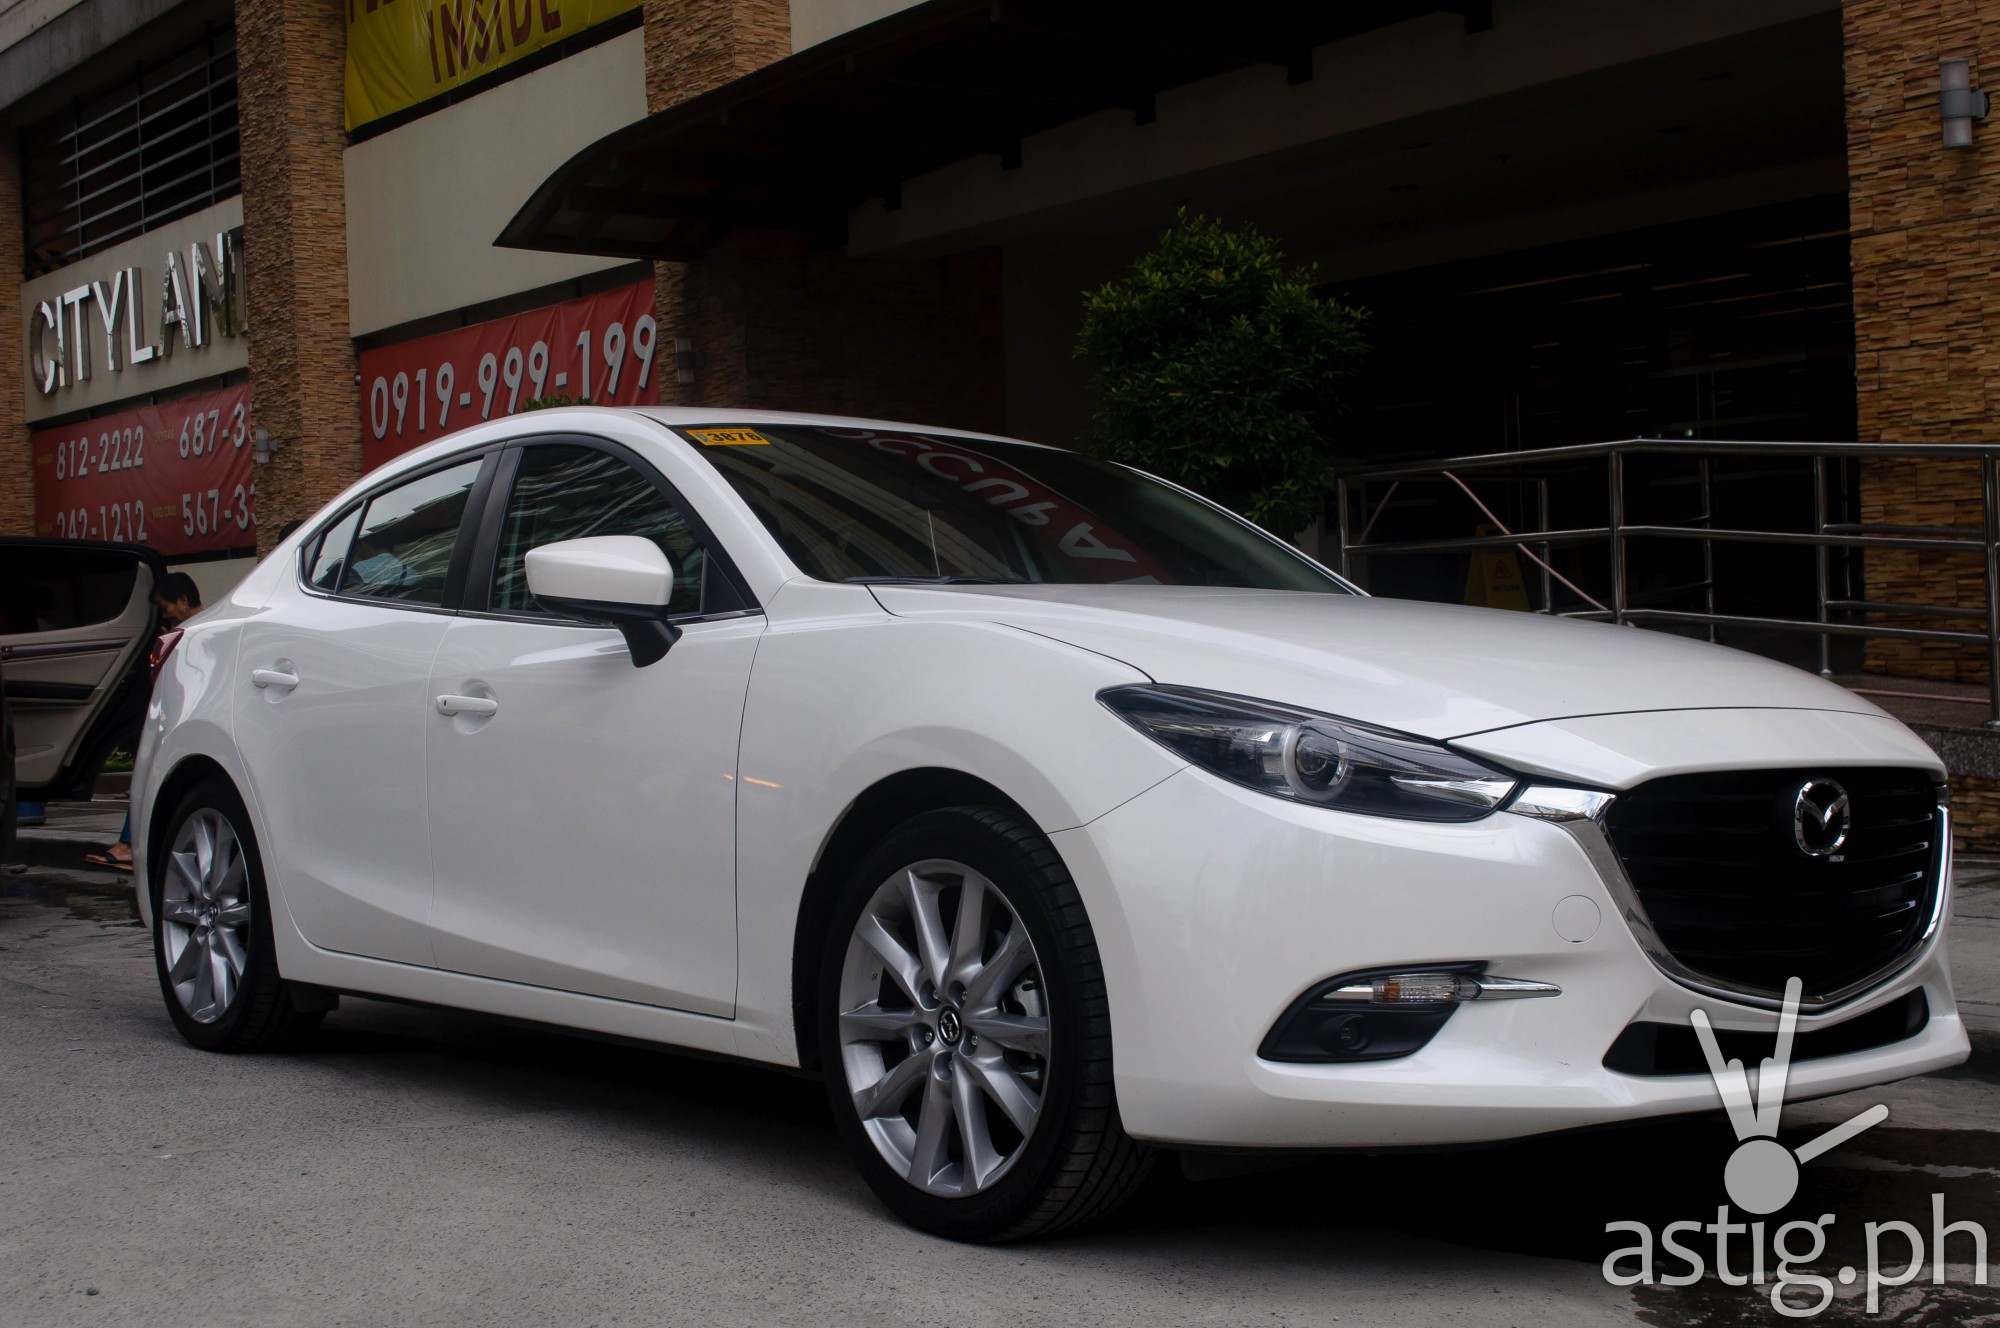 Strong yet refined aesthetics - the Mazda3 sedan sure is a looker!